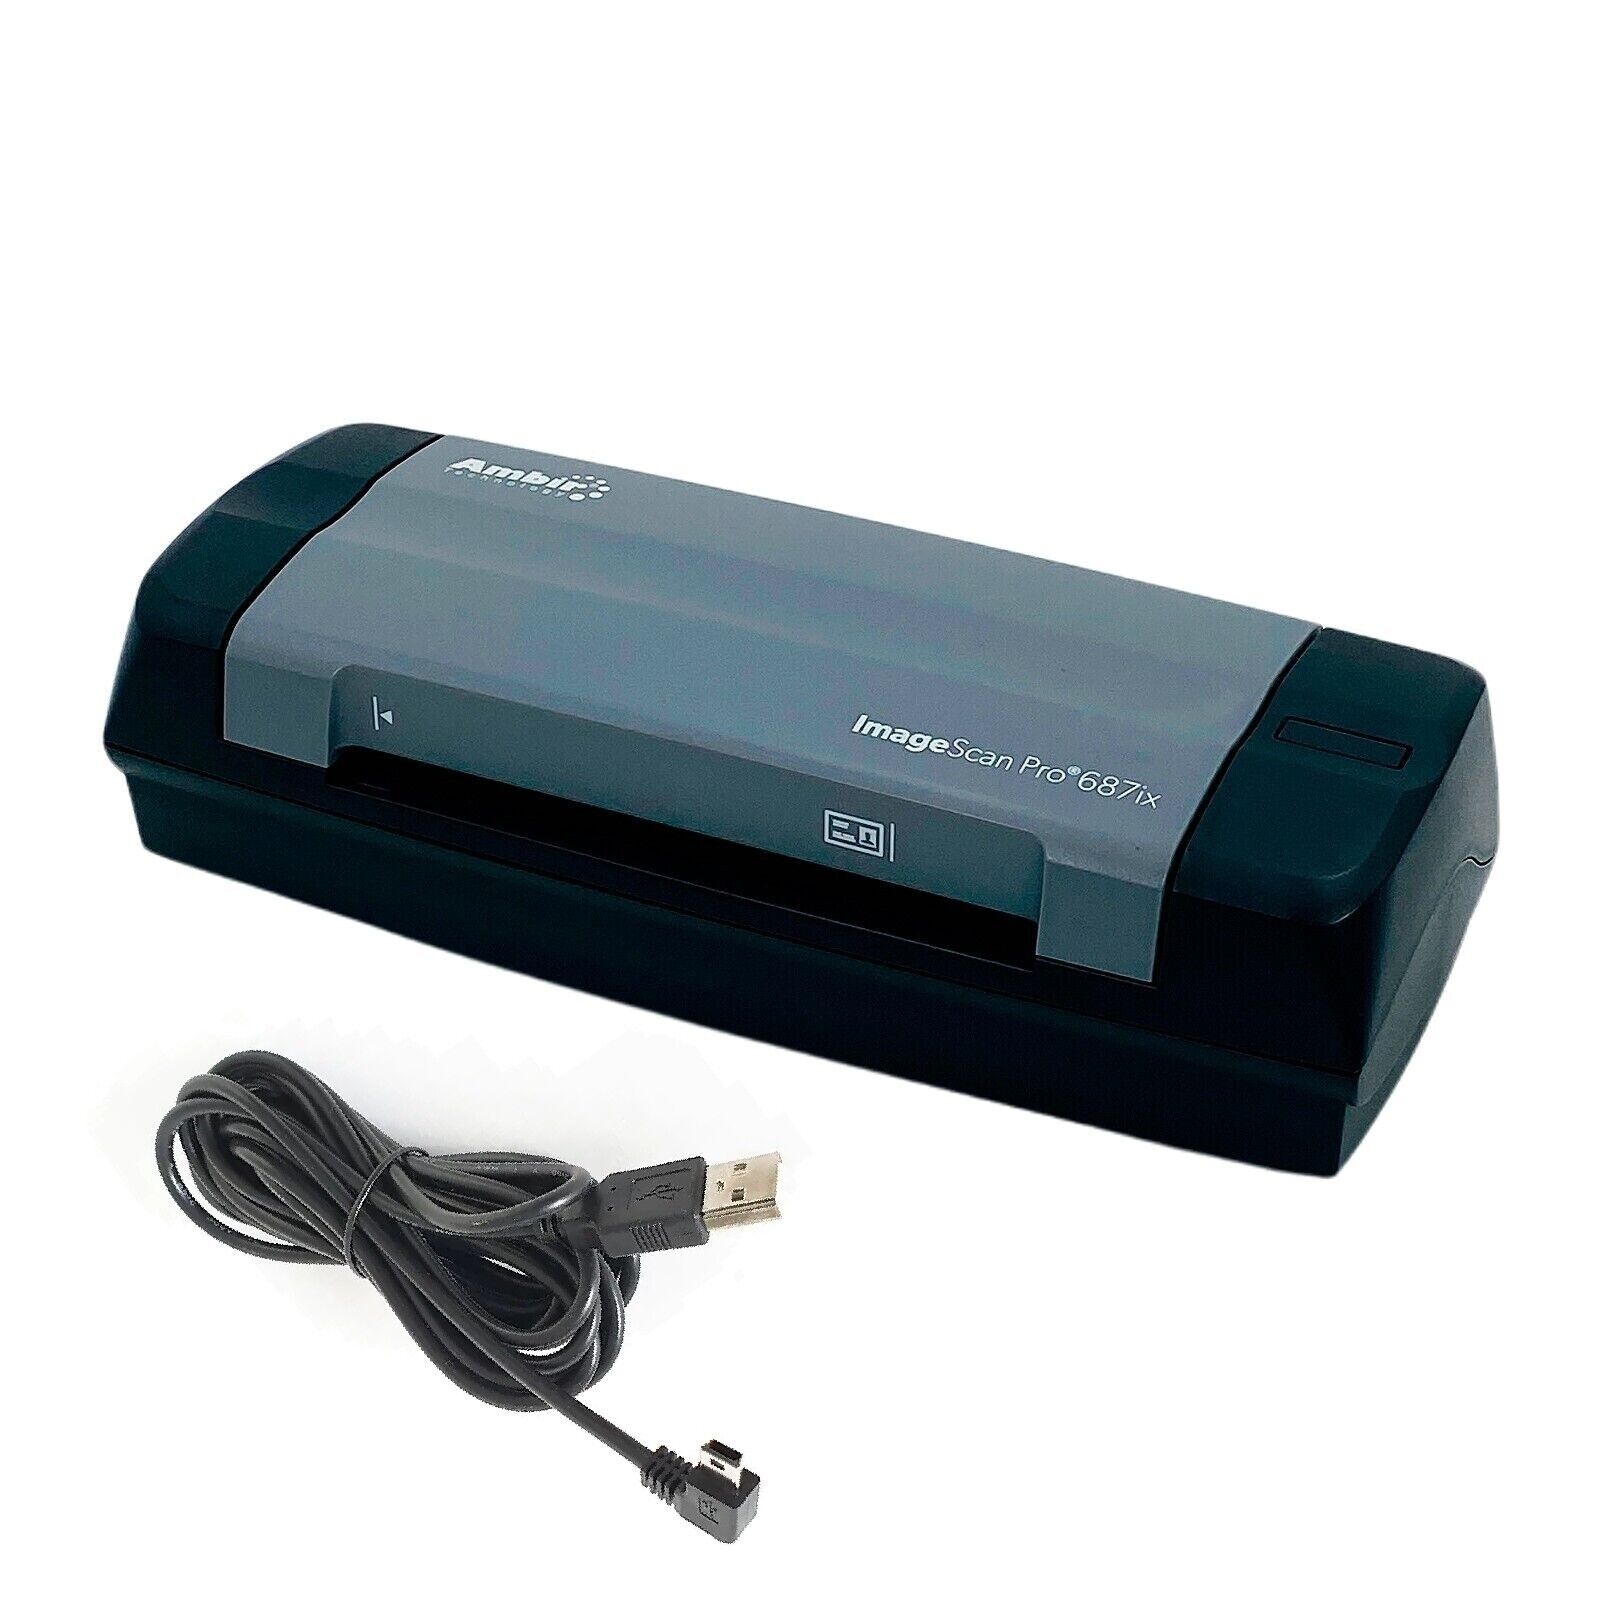 Ambir DS687ix ImageScan Pro Portatble Identity Scan For PC and Mac w/USB Cable